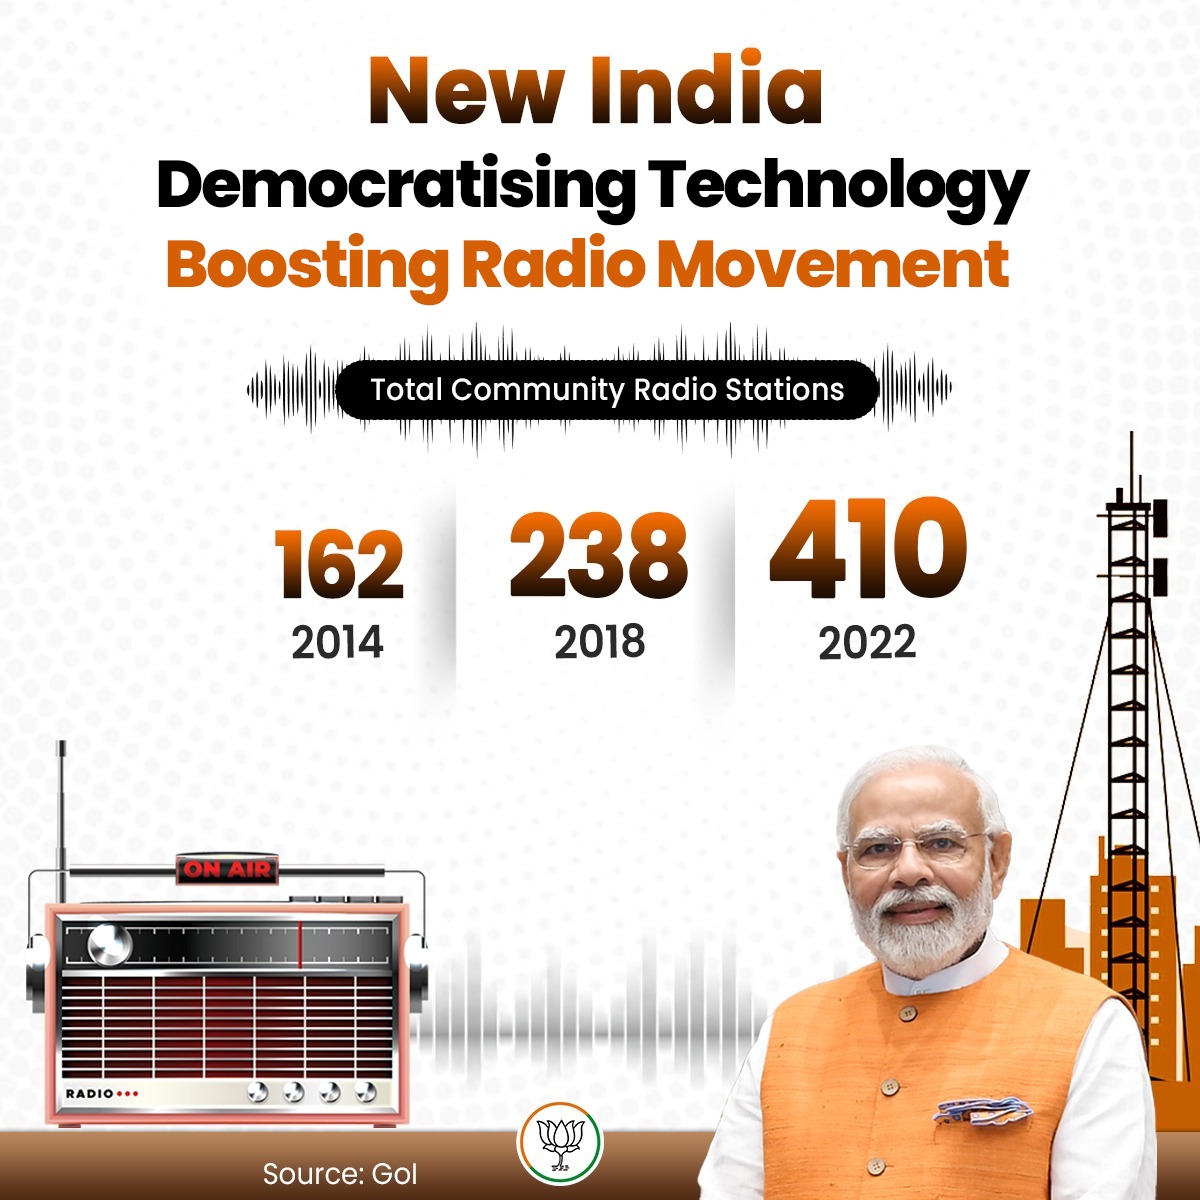 Under PM Modi's leadership, the Community Radios are emerging as 'Connecting Bridges' facilitating a connect between people at the grassroot levels and the Government.